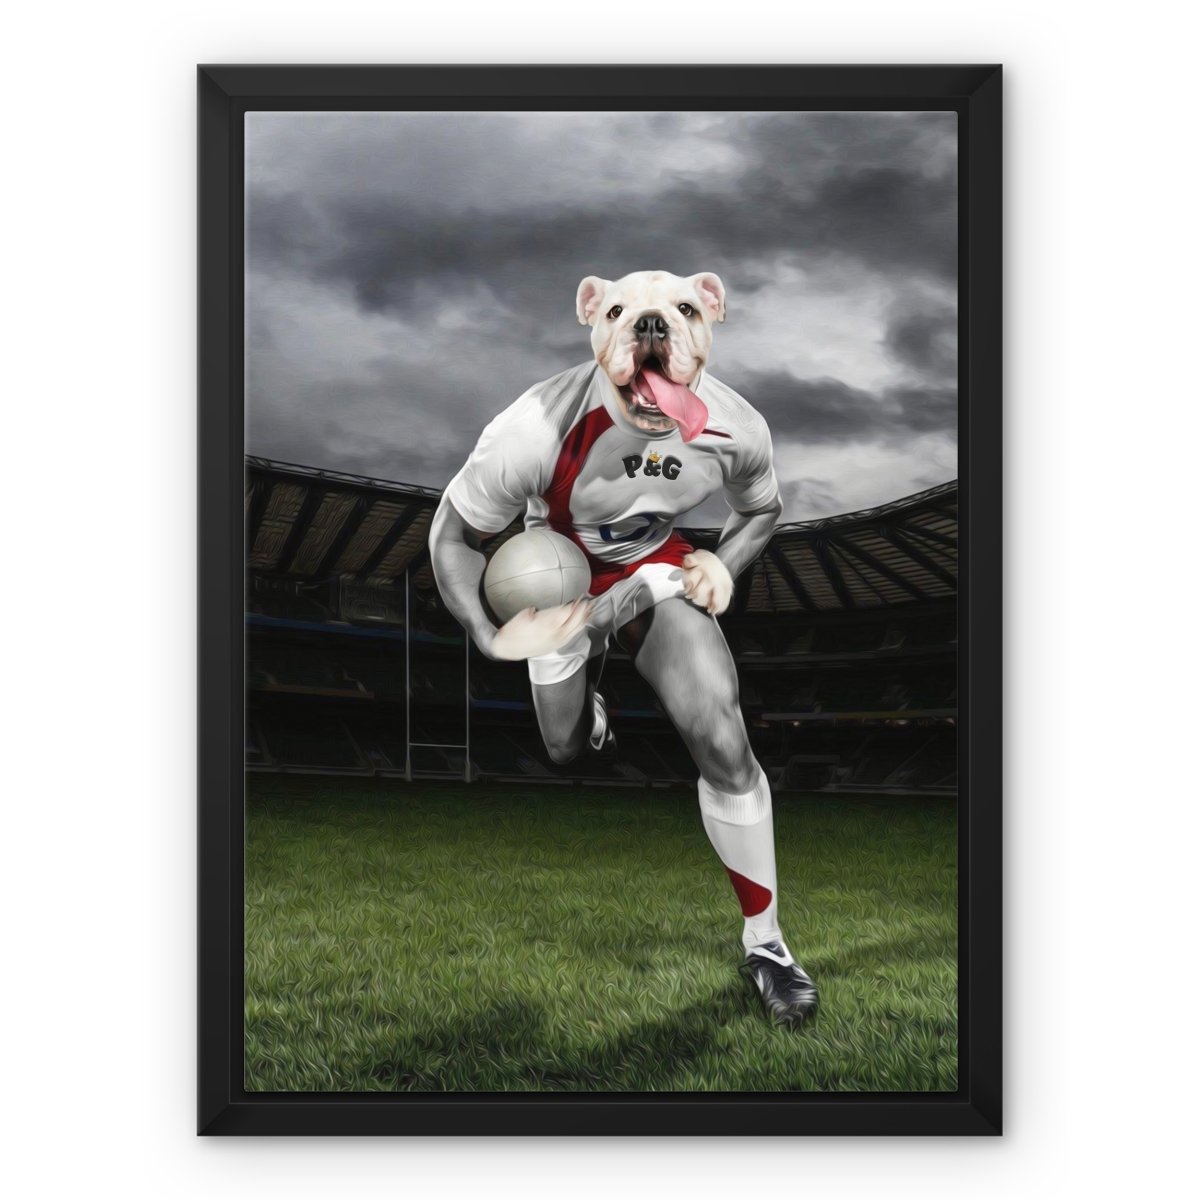 The Rugby Winger: Custom Pet Canvas - Paw & Glory - #pet portraits# - #dog portraits# - #pet portraits uk#paw and glory, custom pet portrait canvas,dog canvas bag, dog wall art canvas, dog canvas print, pet photo to canvas, pet canvas portraits